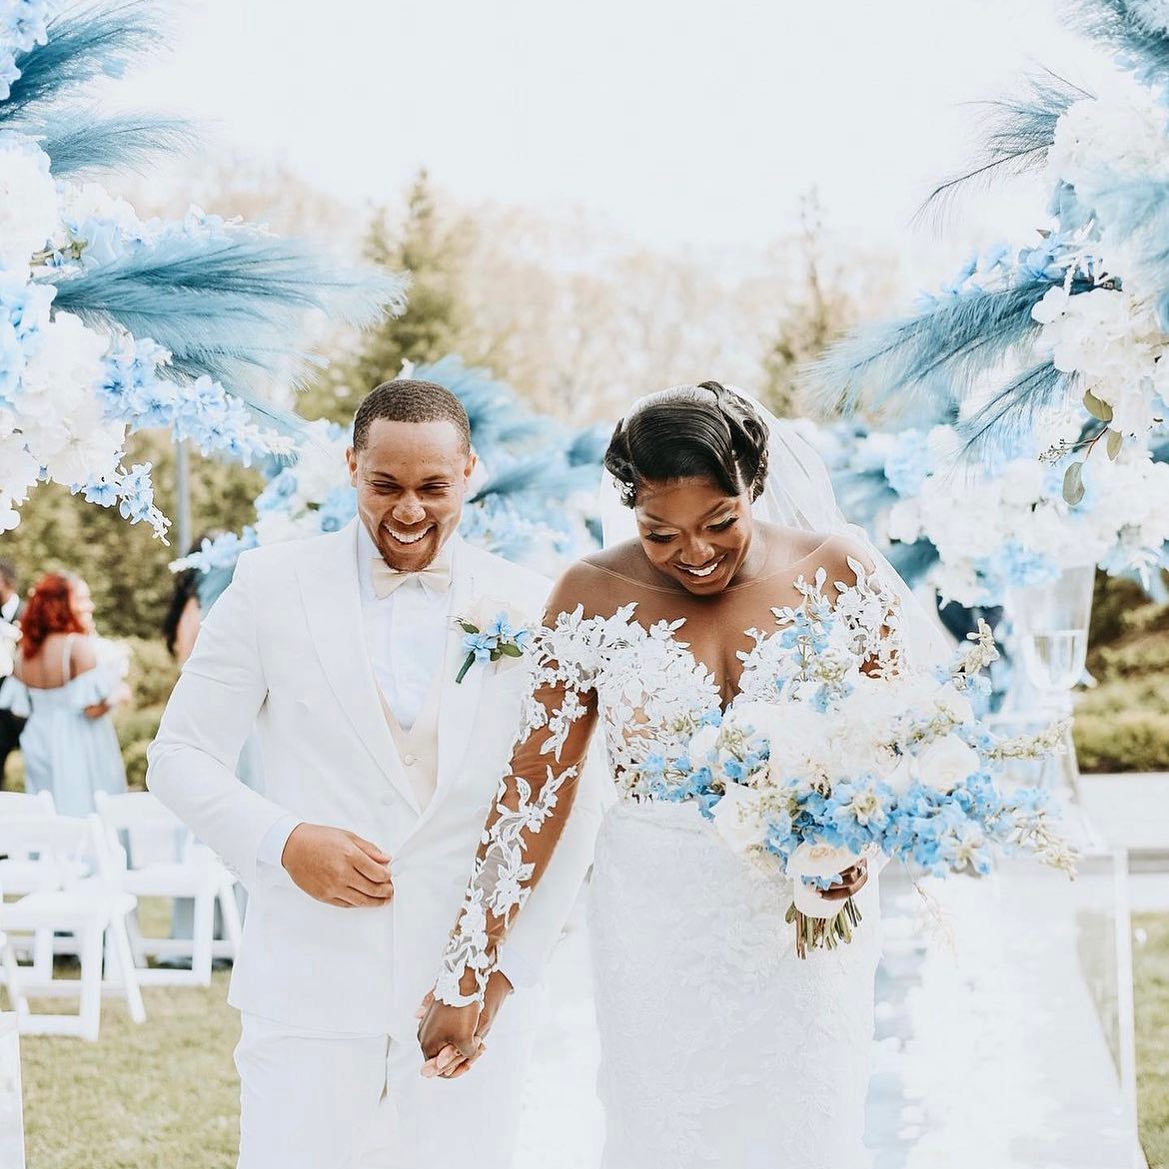 Top 50 Black Wedding Songs That Will Make Your Heart Sing